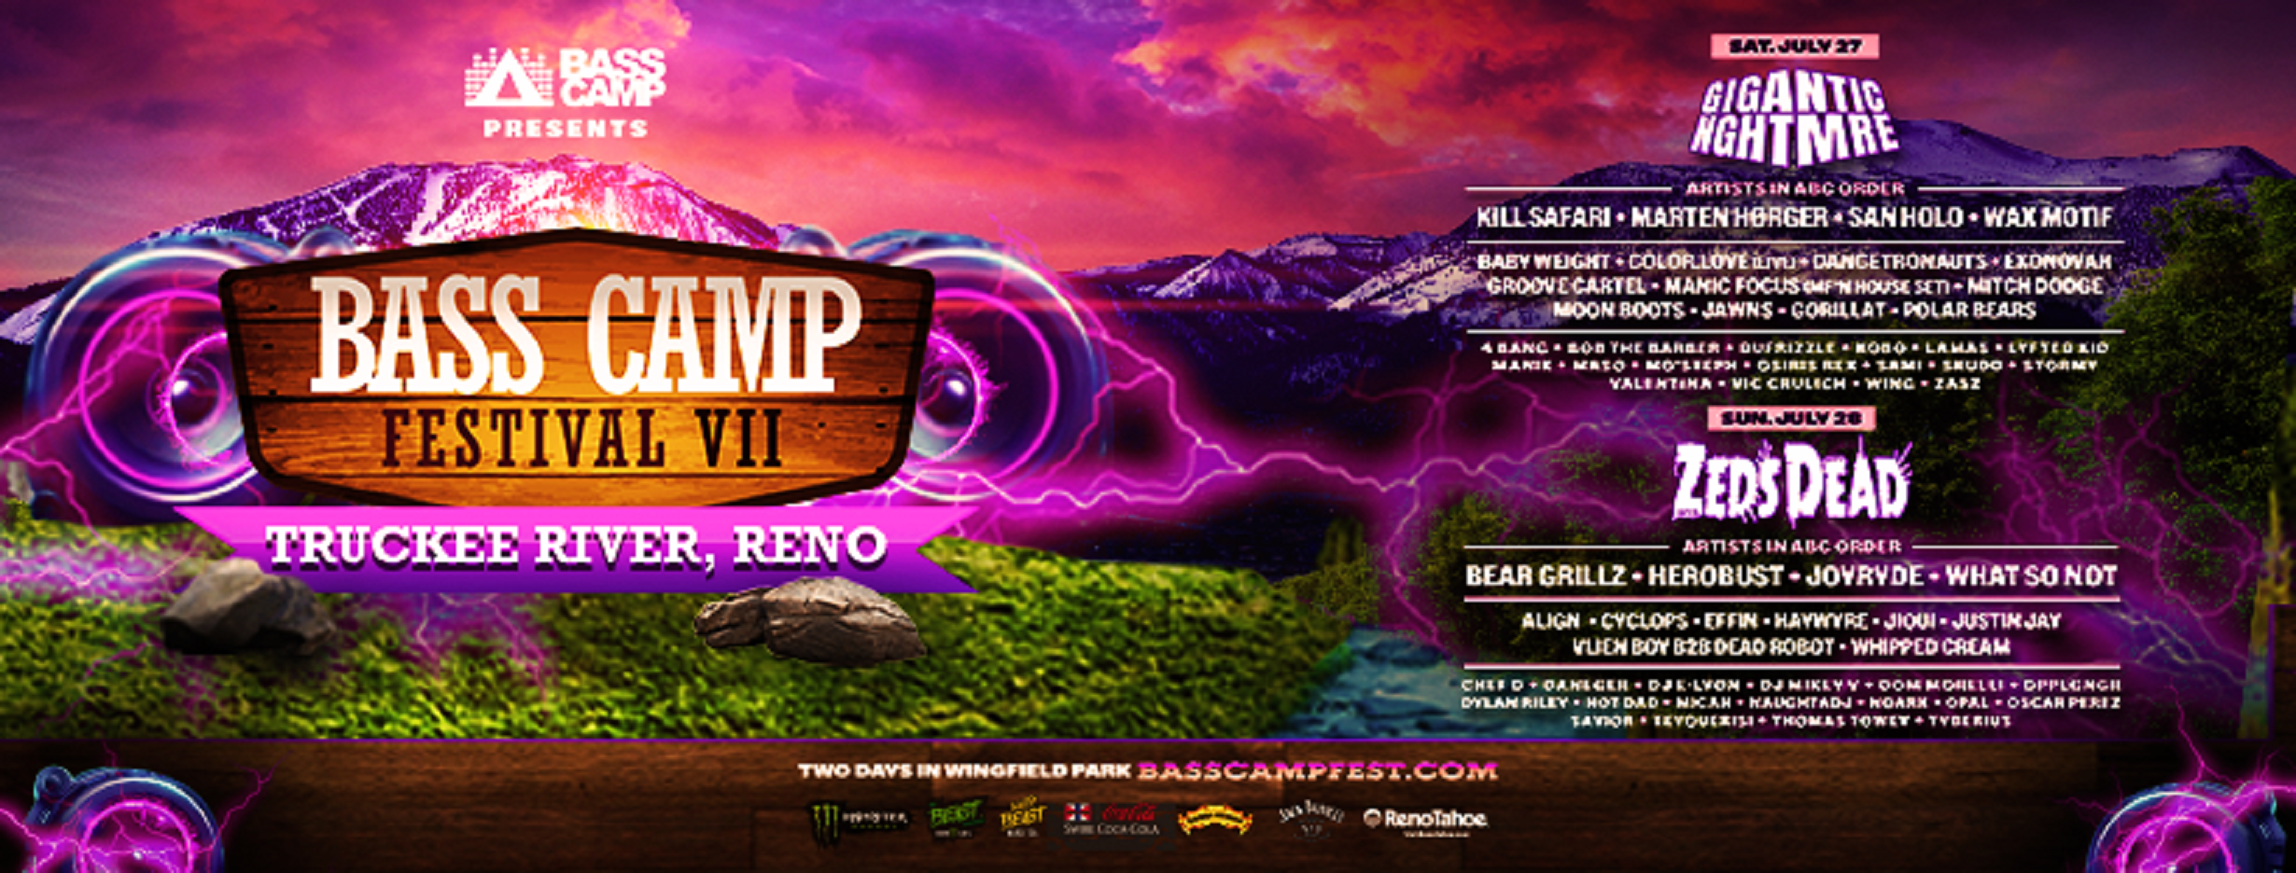 BASS CAMP FESTIVAL ANNOUNCES FINAL LINEUP, ARTISTS-BY-DAY AND SCHEDULE